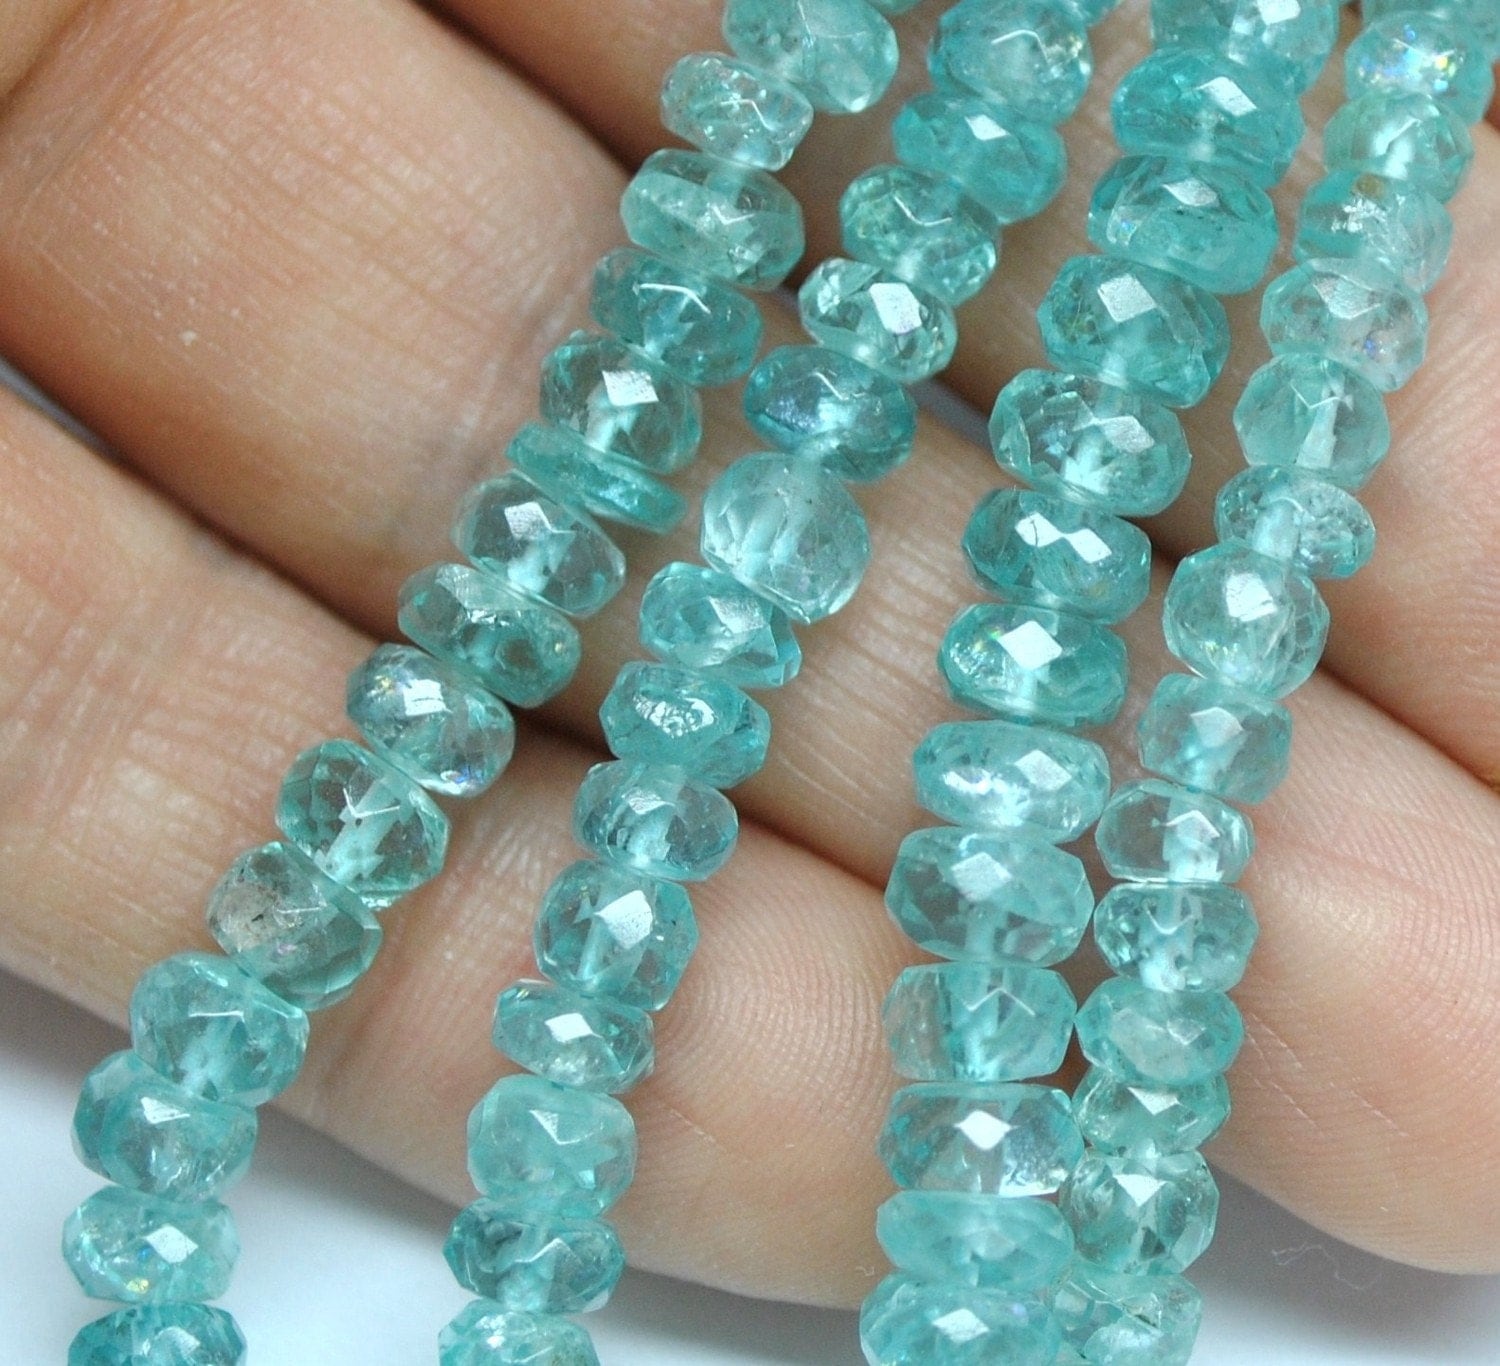 Sparkling Electrical Blue Apatite, Faceted Rondelles Beads 5-7 mm - Pack of 10 pcs - 110331-04 - AliveGems